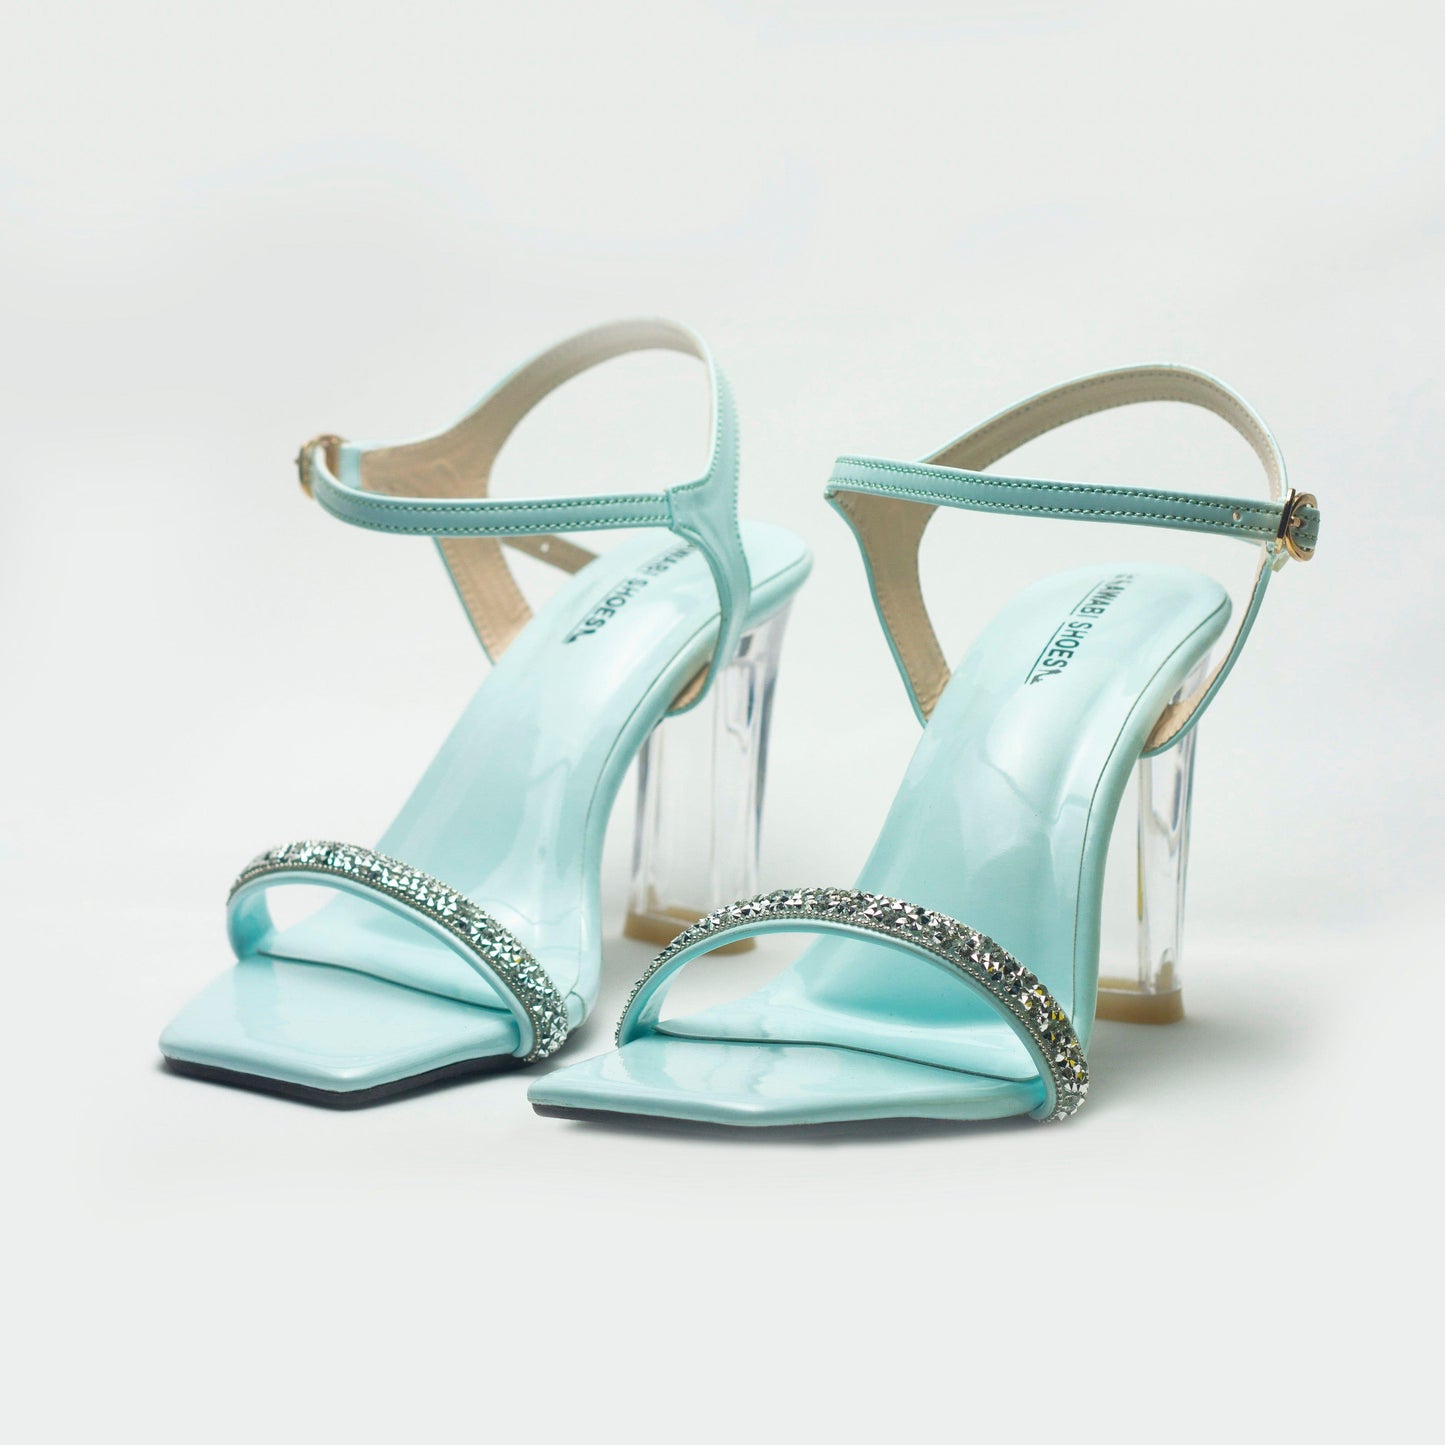 Nawabi Shoes BD Shoes 35 / lightcyan / 2.5 Make a Statement with Our Selection of Transparent Heels